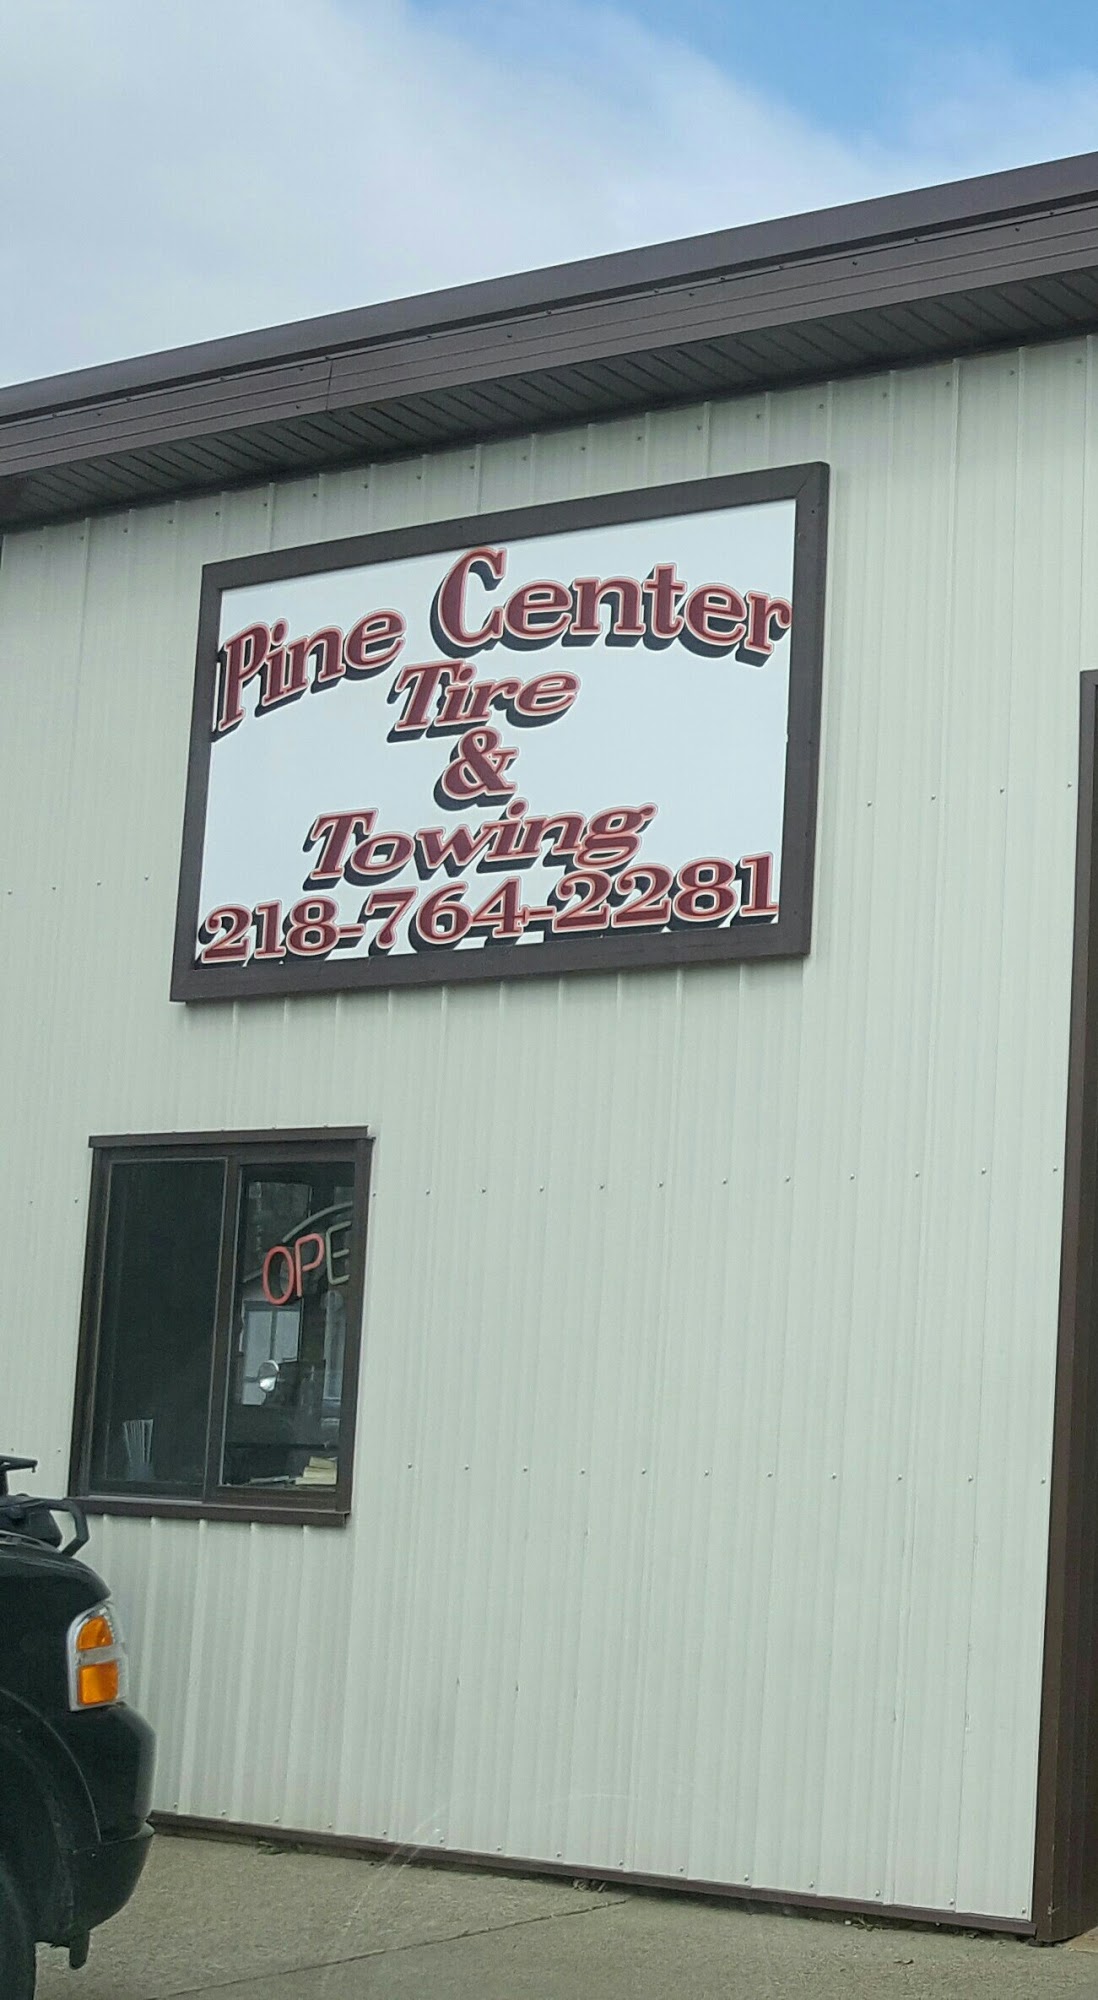 Pine Center Tire And Towing